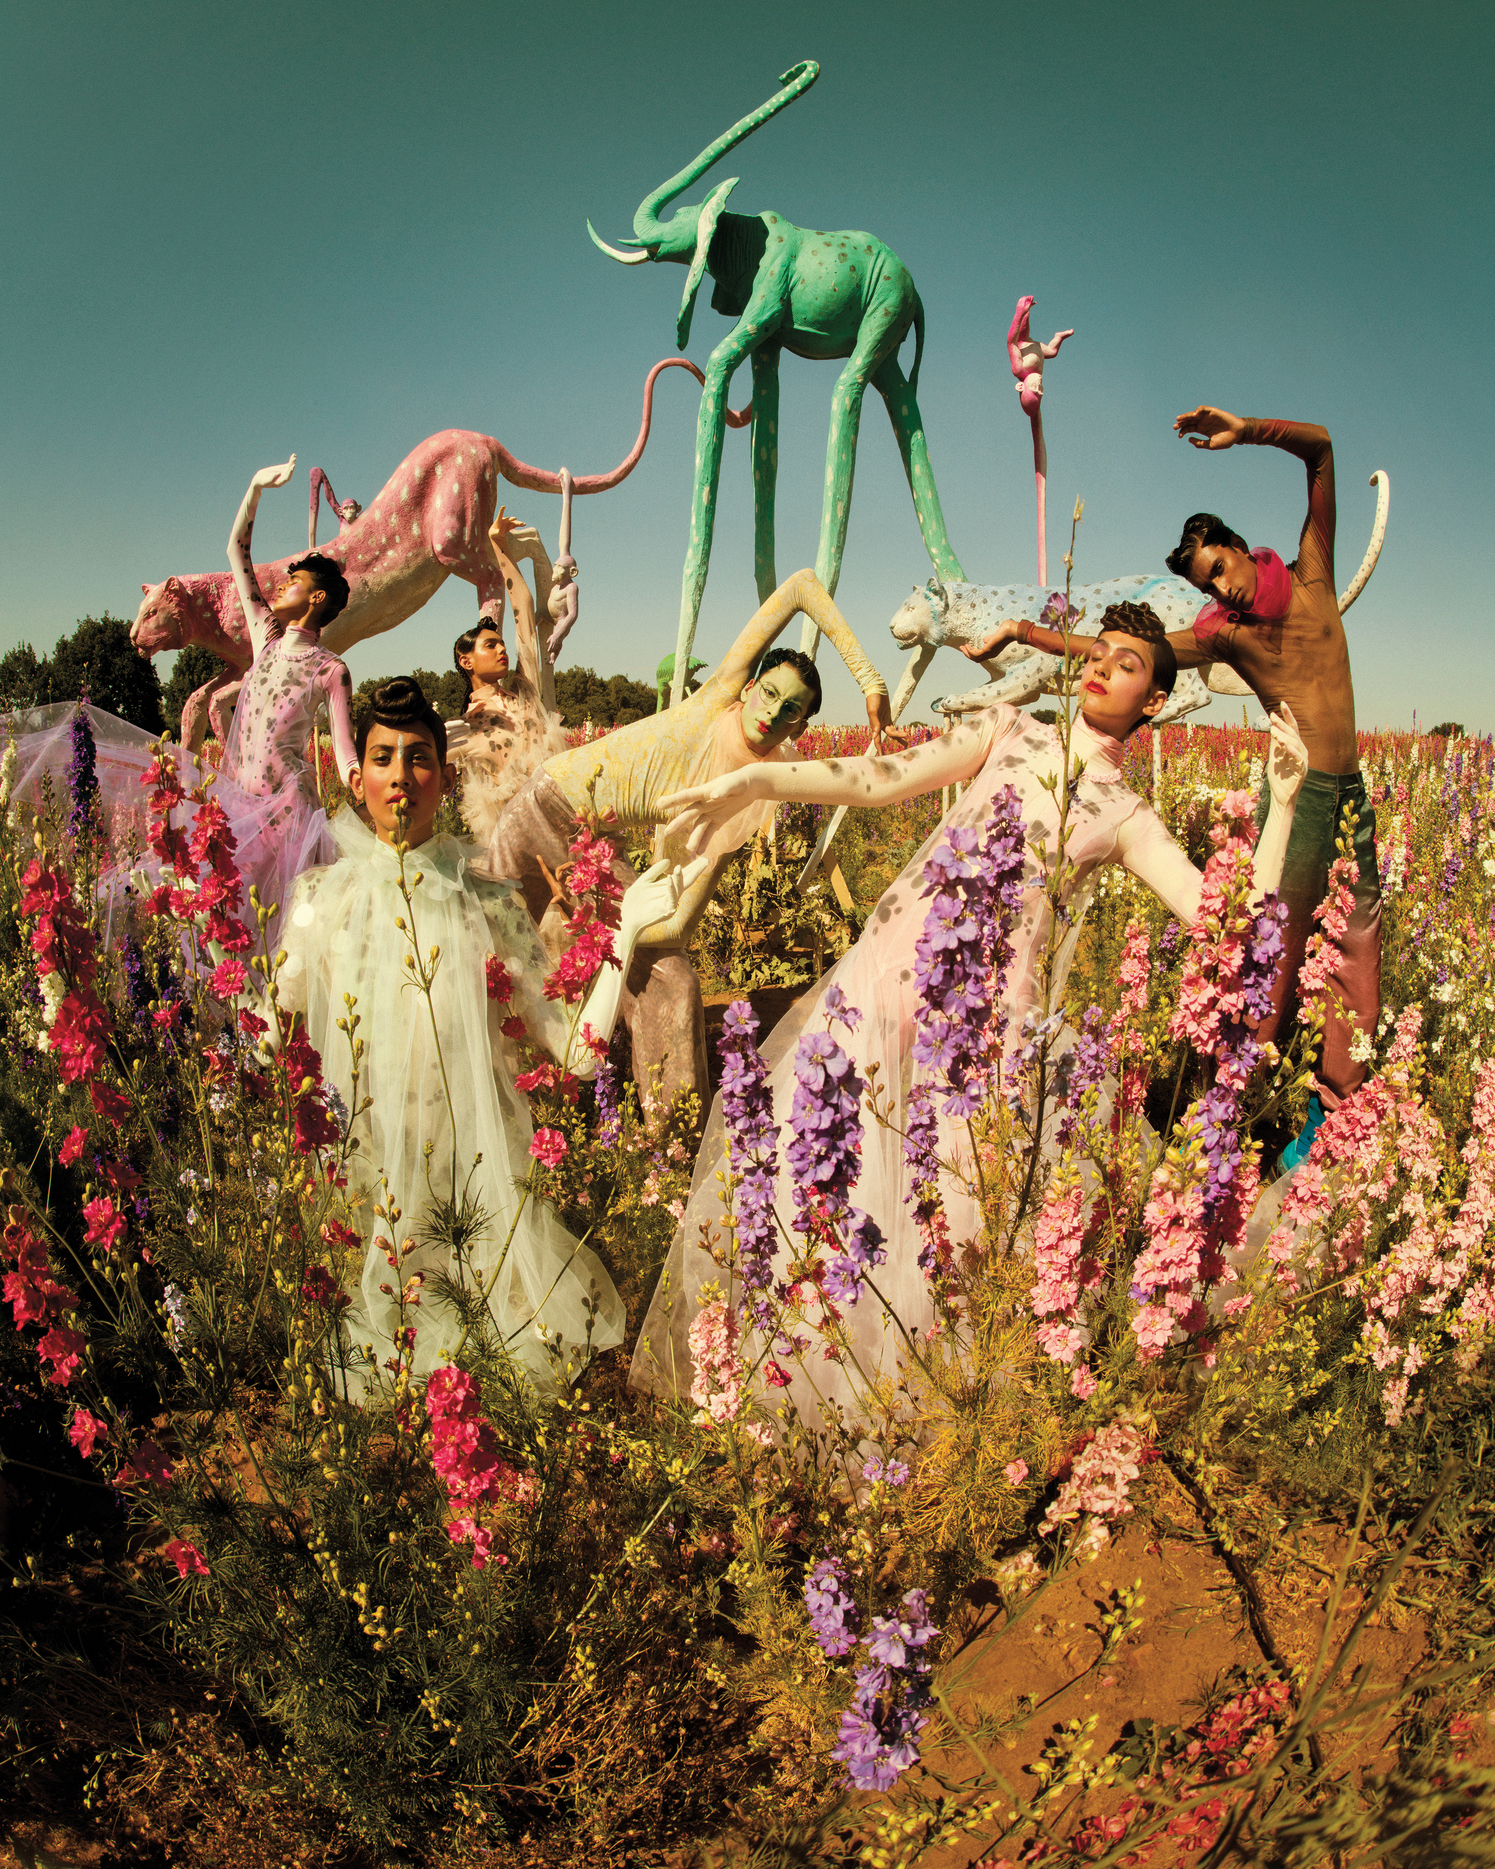 Tim Walker - one of the world's leading fashion photographers